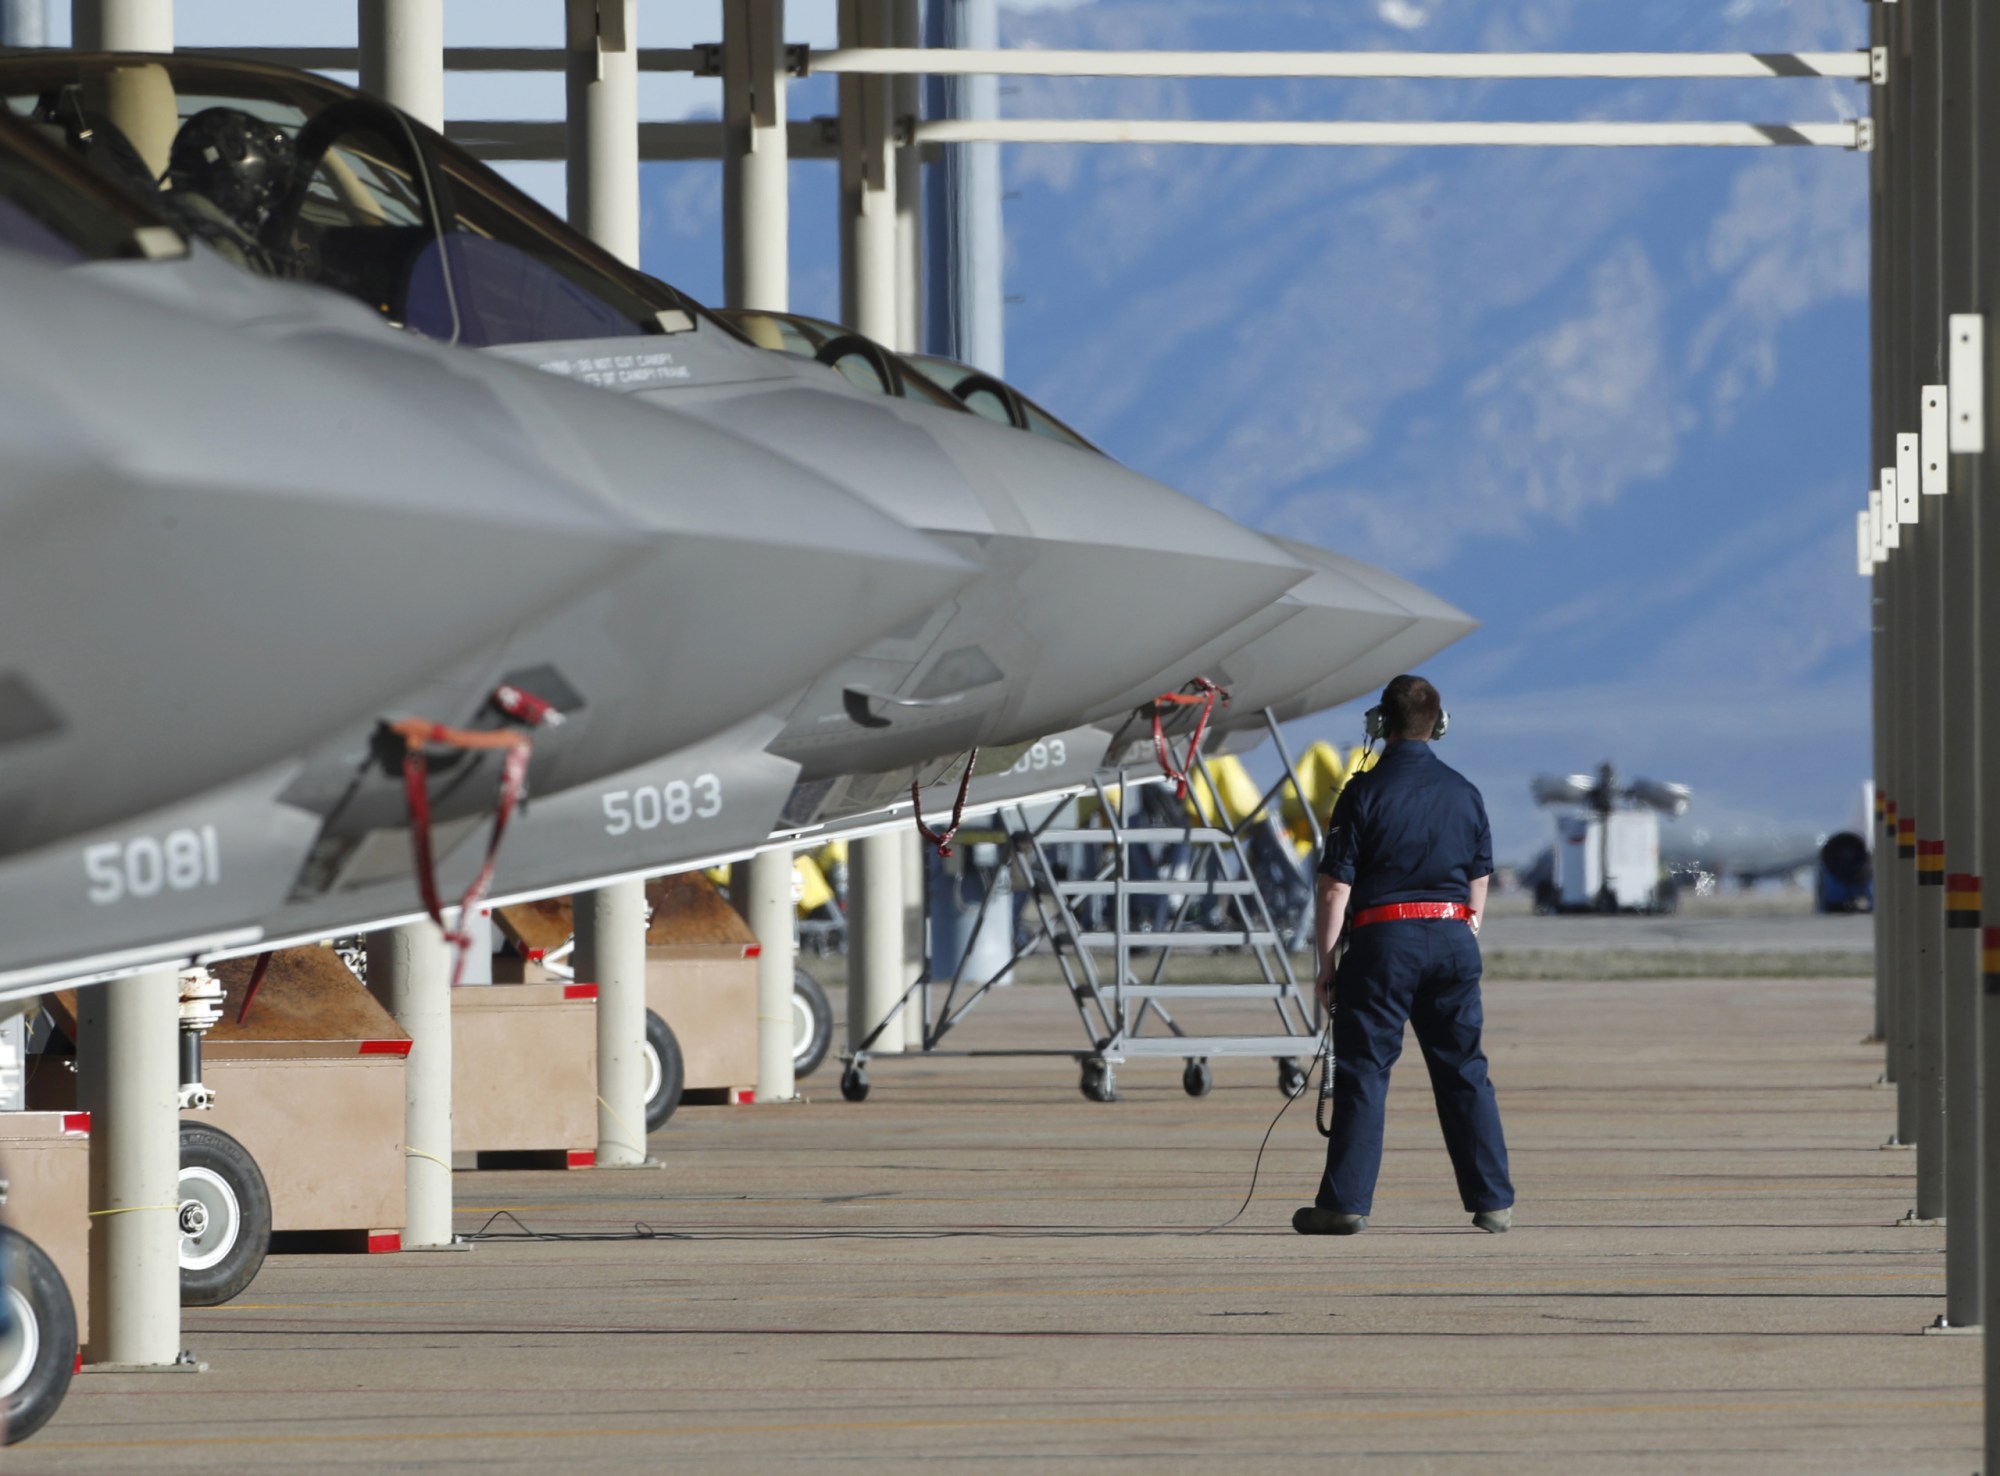 OGDEN, UT - MARCH 15: Ground crew members prepare an F-35 fighter jet for a training mission at Hill Air Force Base on March 15, 2017 in Ogden, Utah. Hill is the first Air Force base to get combat ready F-35's. They currently have 17 that might be deployed in the fight against terrorism and ISIS in the near future. (Photo by George Frey/Getty Images)